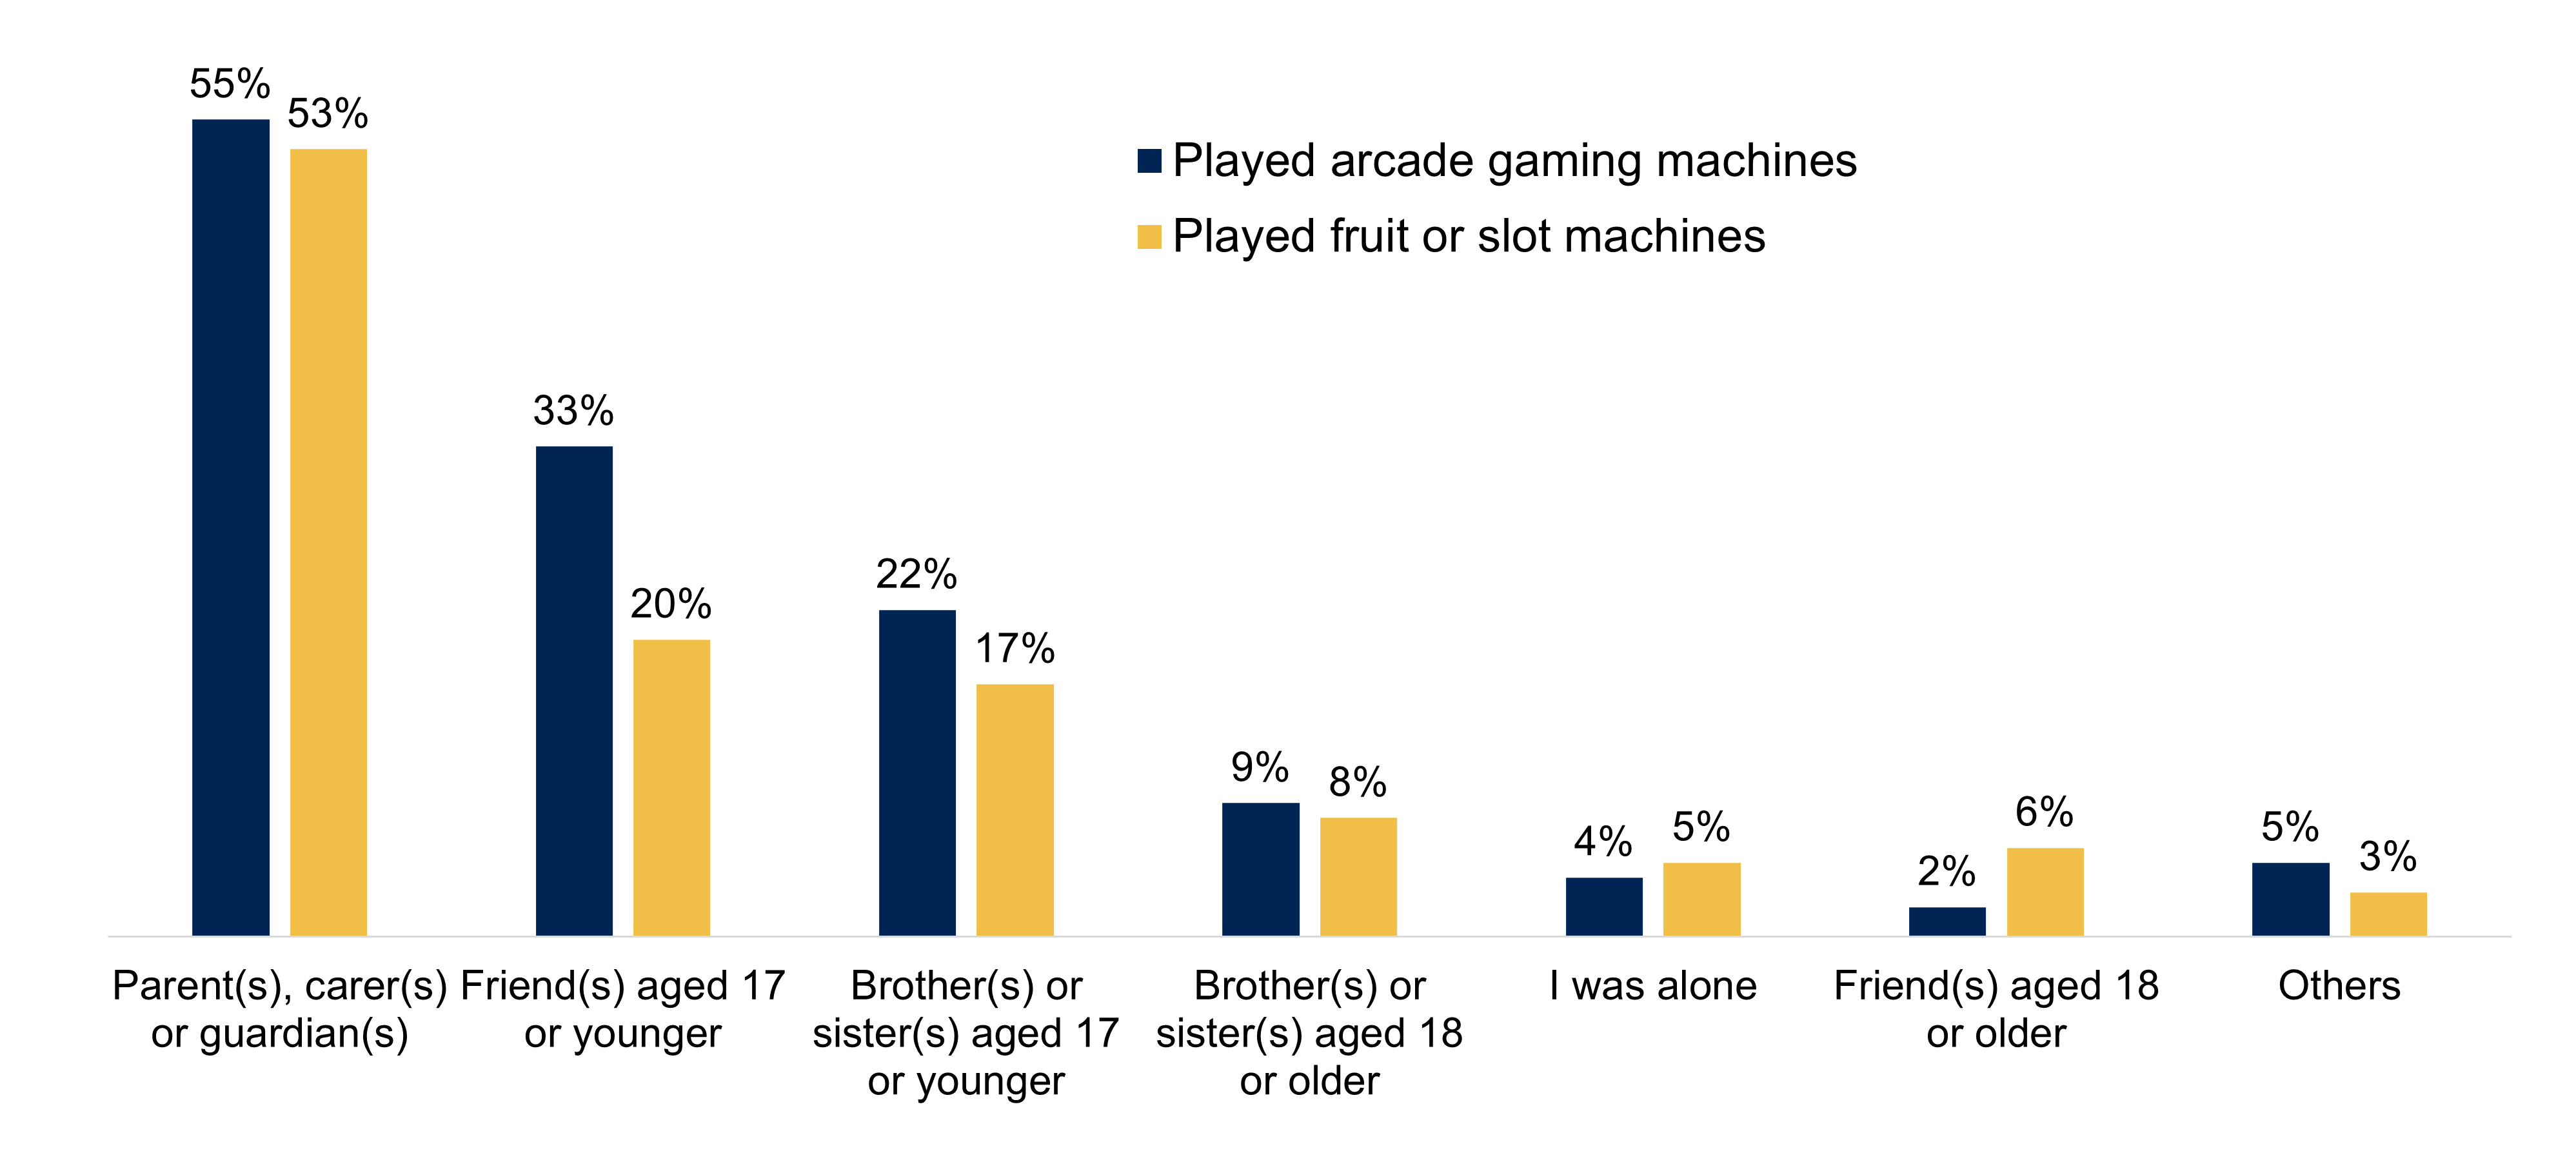 A bar chart showing who young people were with when playing games and gaming machines, from 'Parent(s), carer(s) or guardian(s)' to 'I was alone'. For each group of people there are two bars. One bar represents those young people who played arcade gaming machines, the other bar represents those young people that played fruit or slot machines. Data from the chart is provided within the following table.